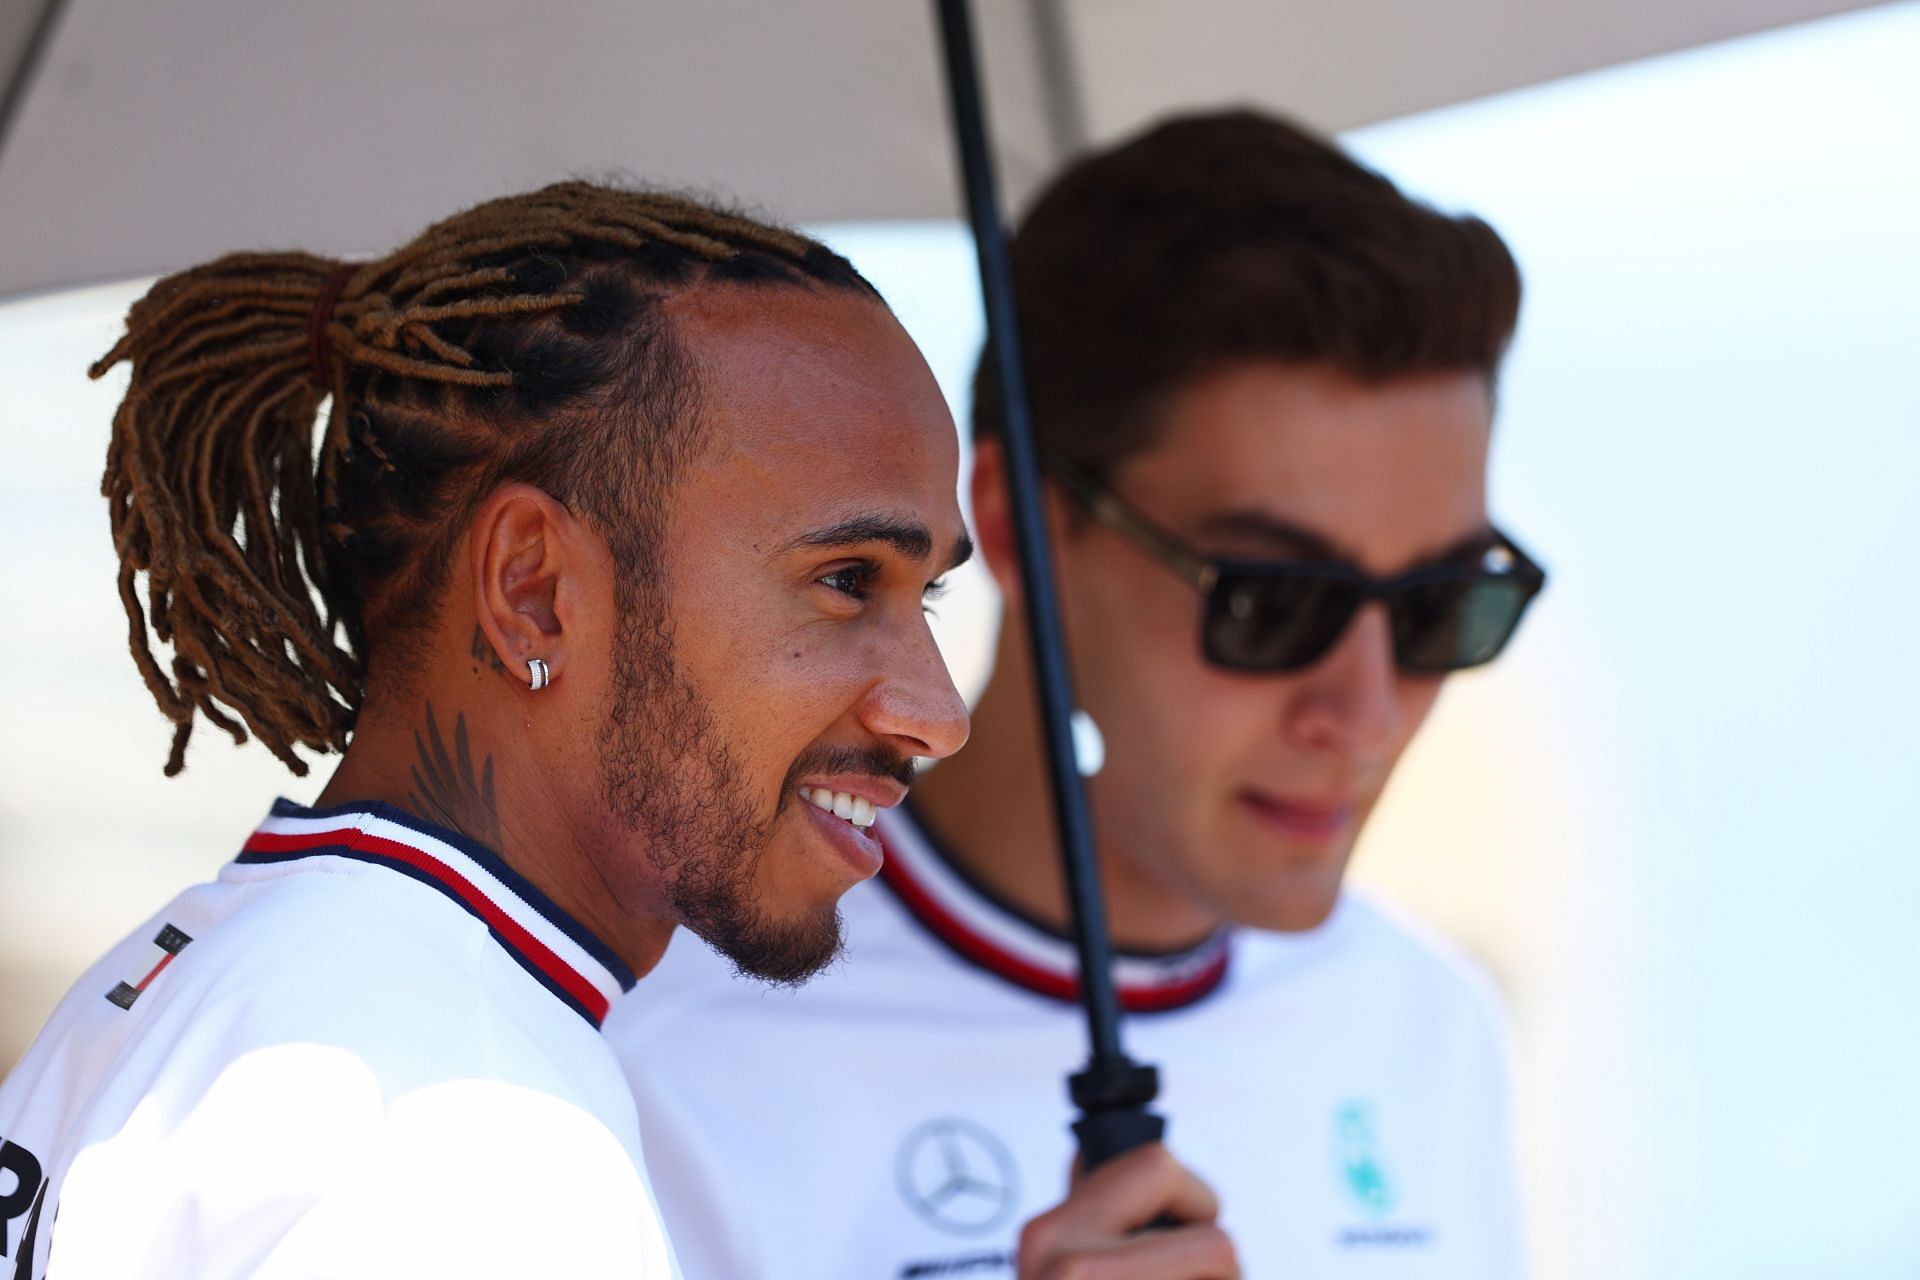 George Russell (background) and Lewis Hamilton (foreground) talk to the media ahead of the F1 Grand Prix of Azerbaijan at Baku City Circuit on June 12, 2022, in Baku, Azerbaijan. (Photo by Clive Rose/Getty Images)